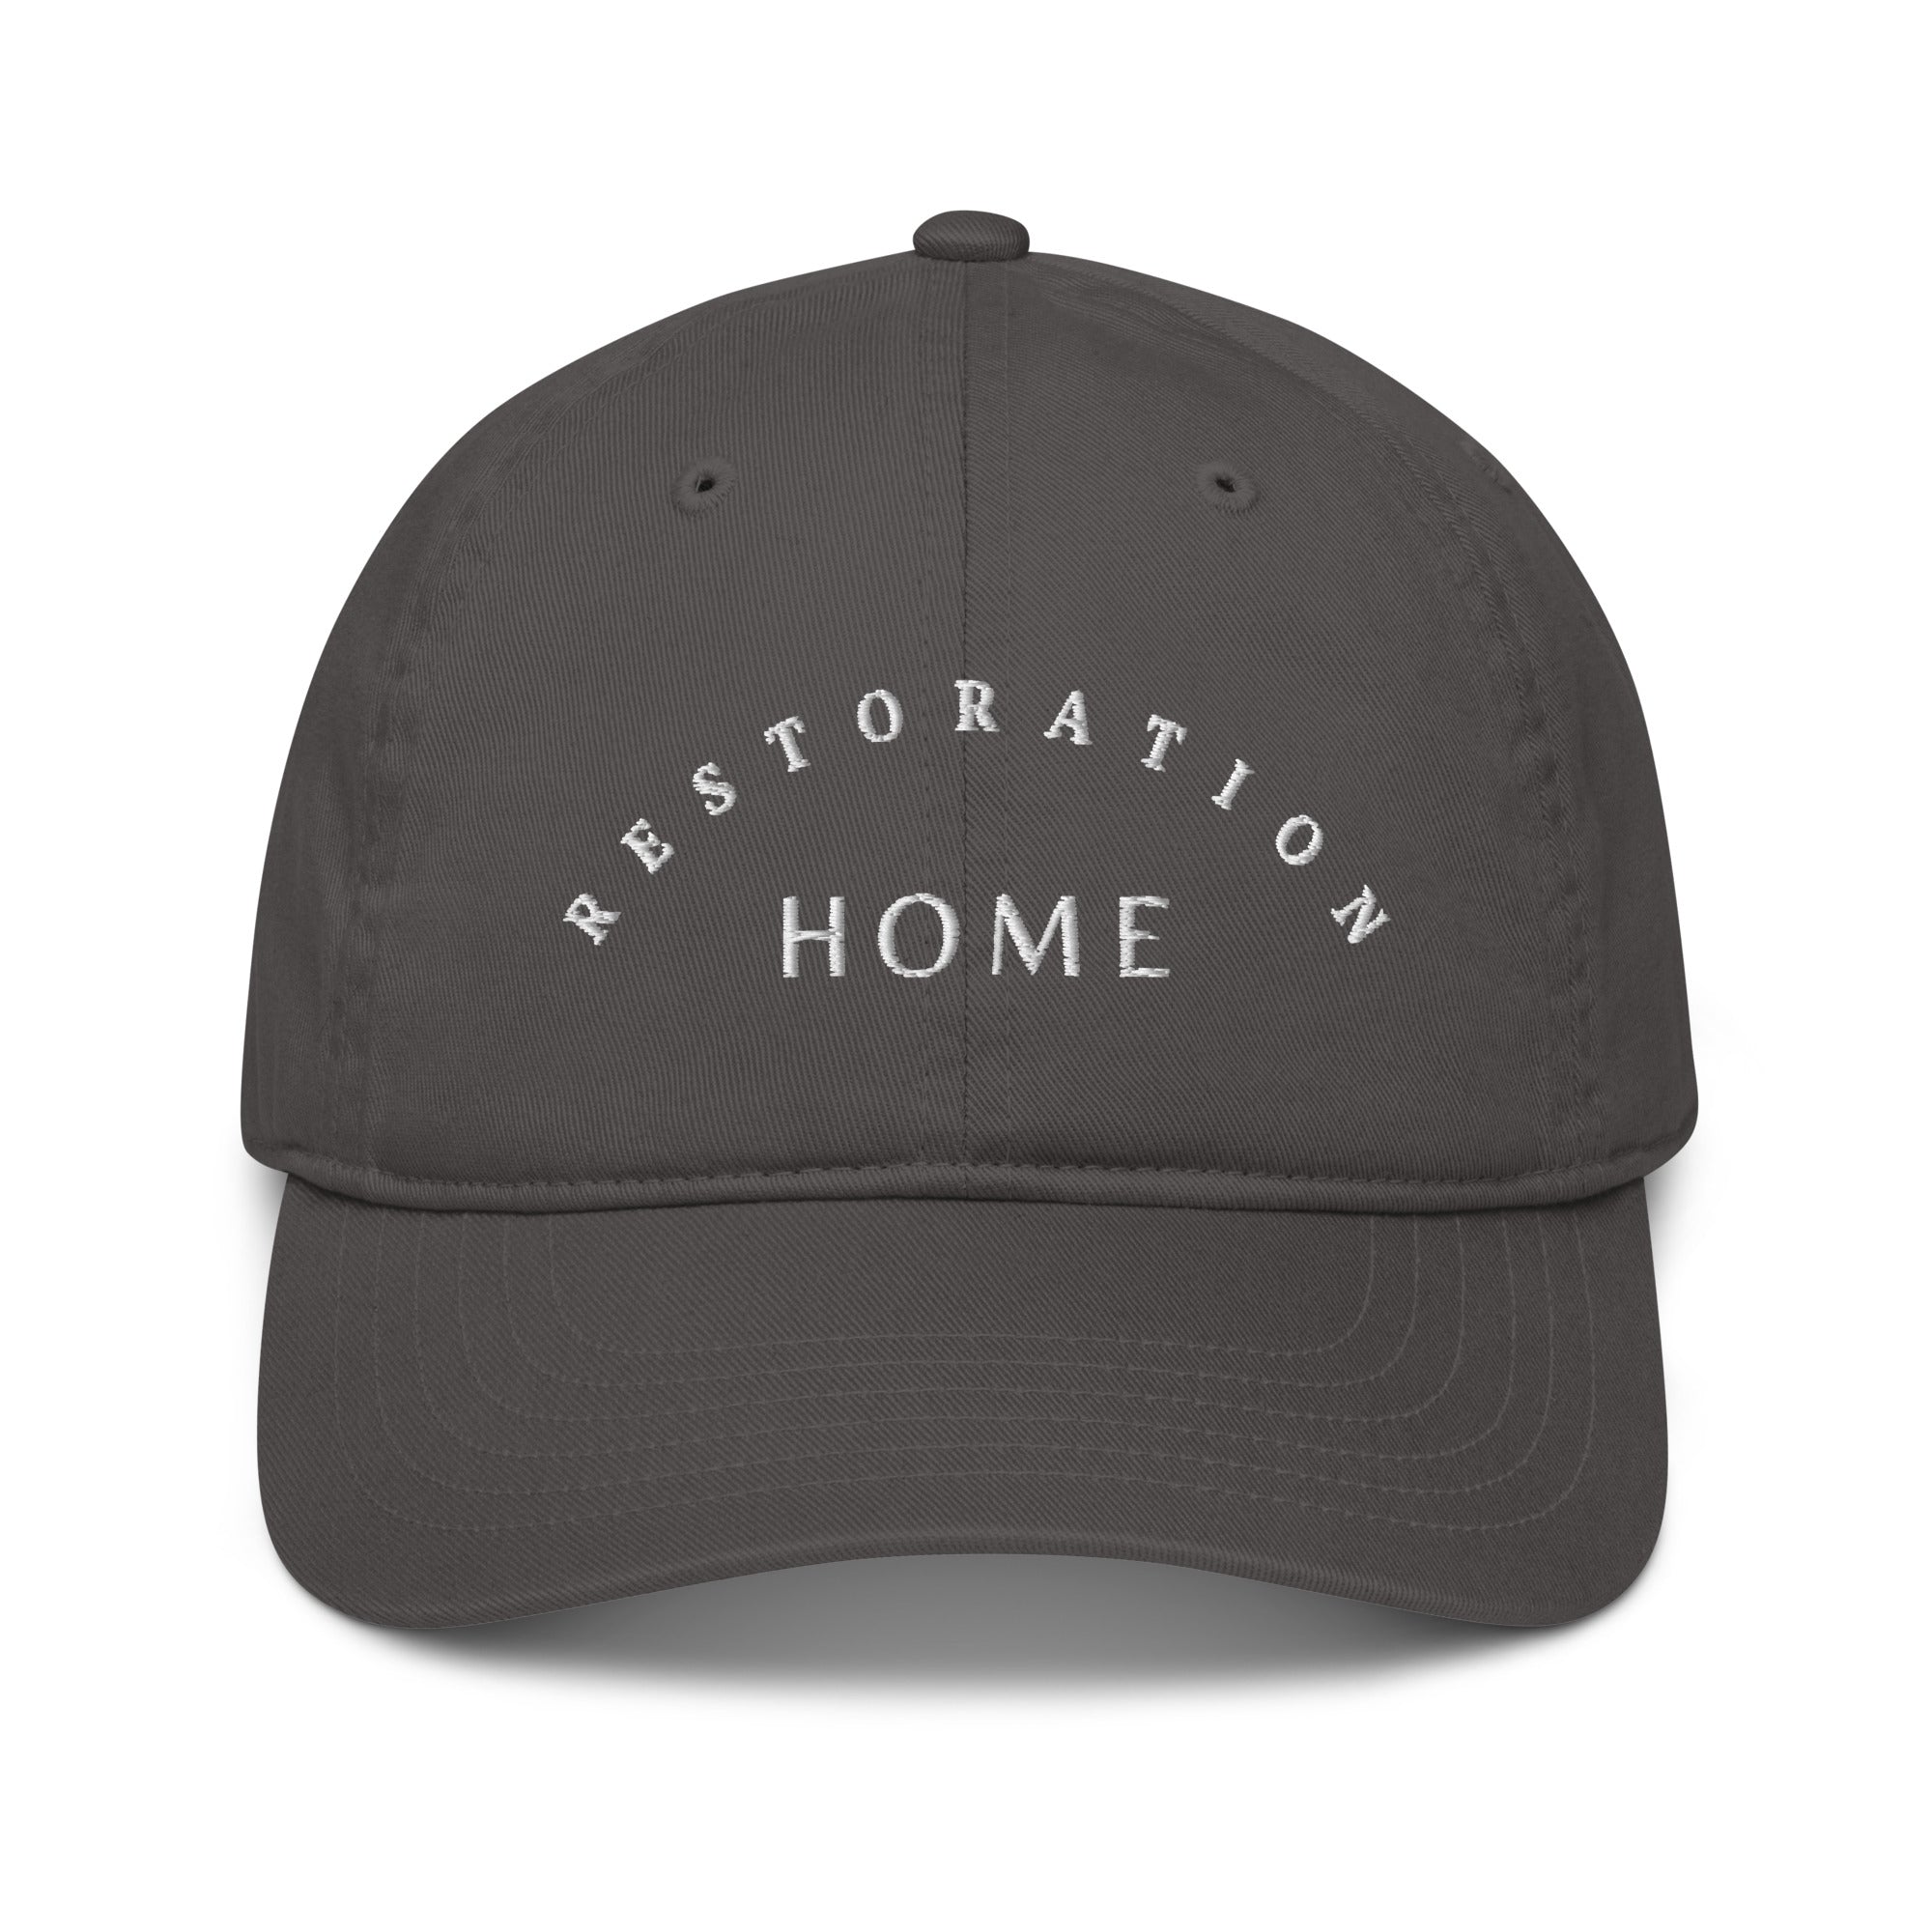 Grey dad hat. "Restoration Home" written across the front.